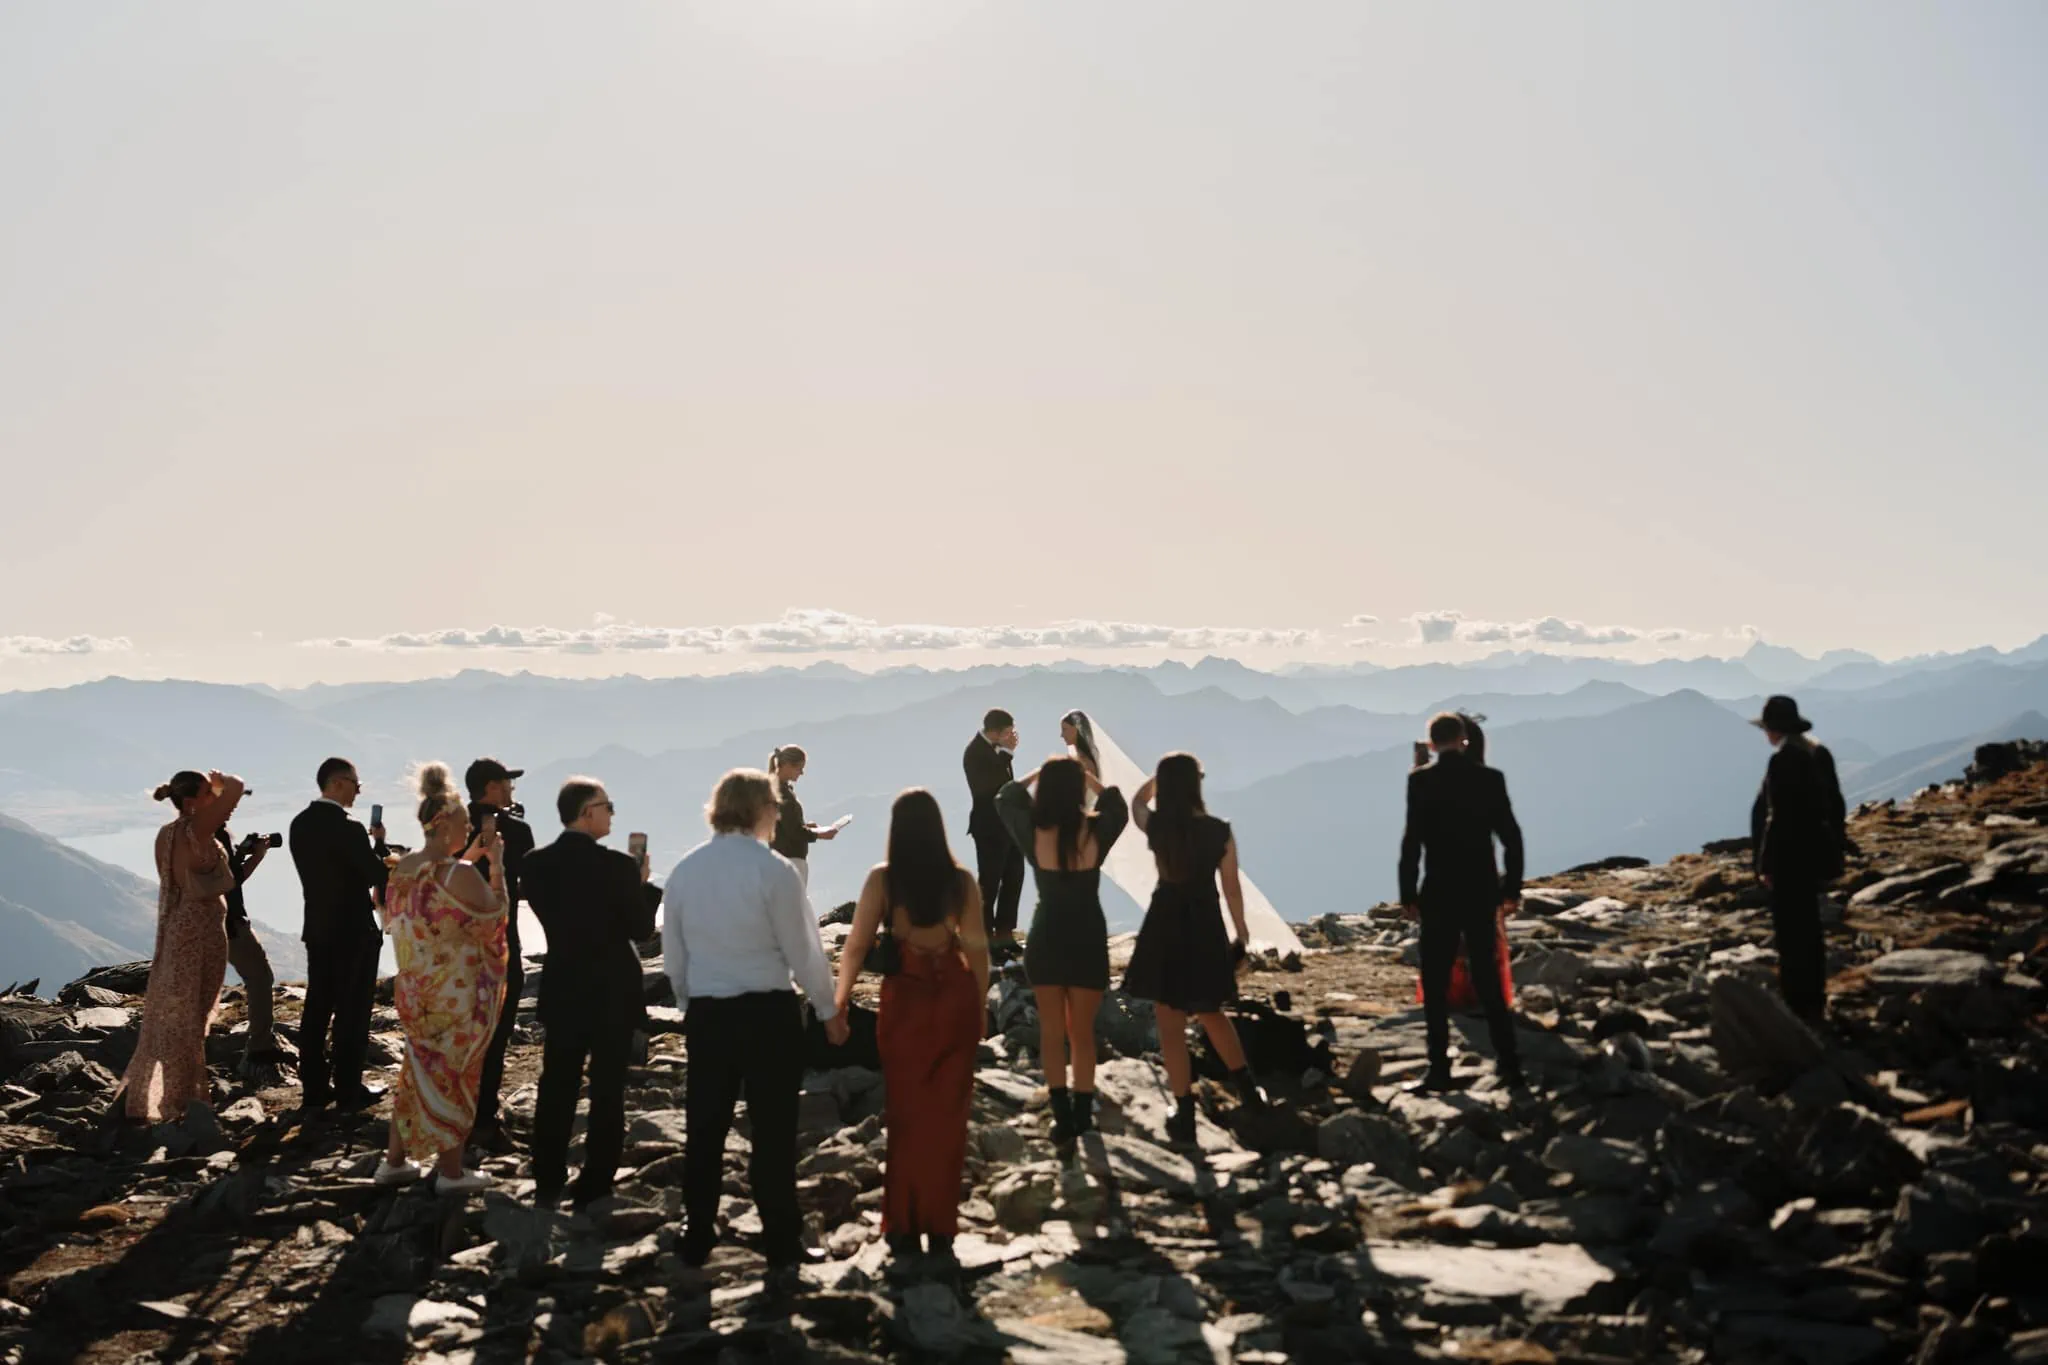 Queenstown New Zealand Elopement Wedding Photographer - A group of people reaching a mountain summit.